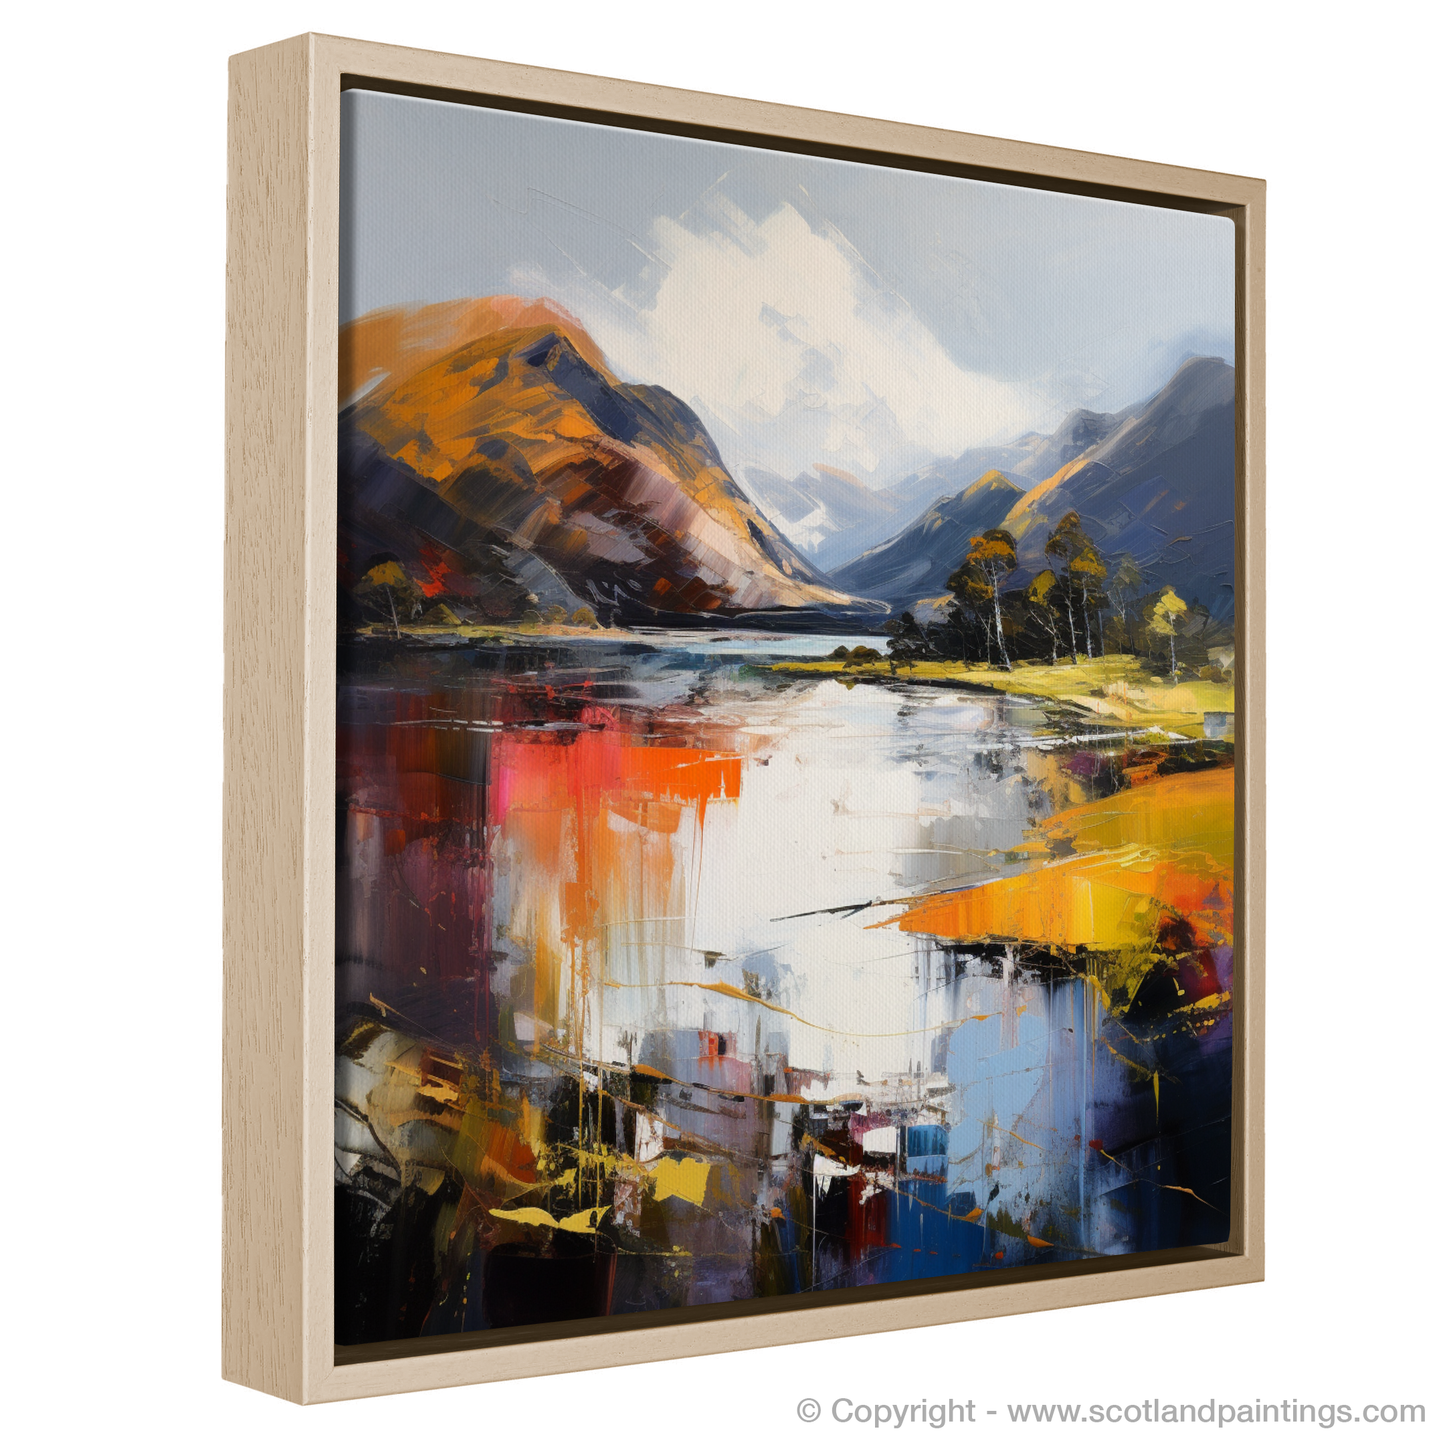 Painting and Art Print of Loch Shiel, Highlands entitled "Wild Essence of Loch Shiel: An Expressionist Ode to the Scottish Highlands".